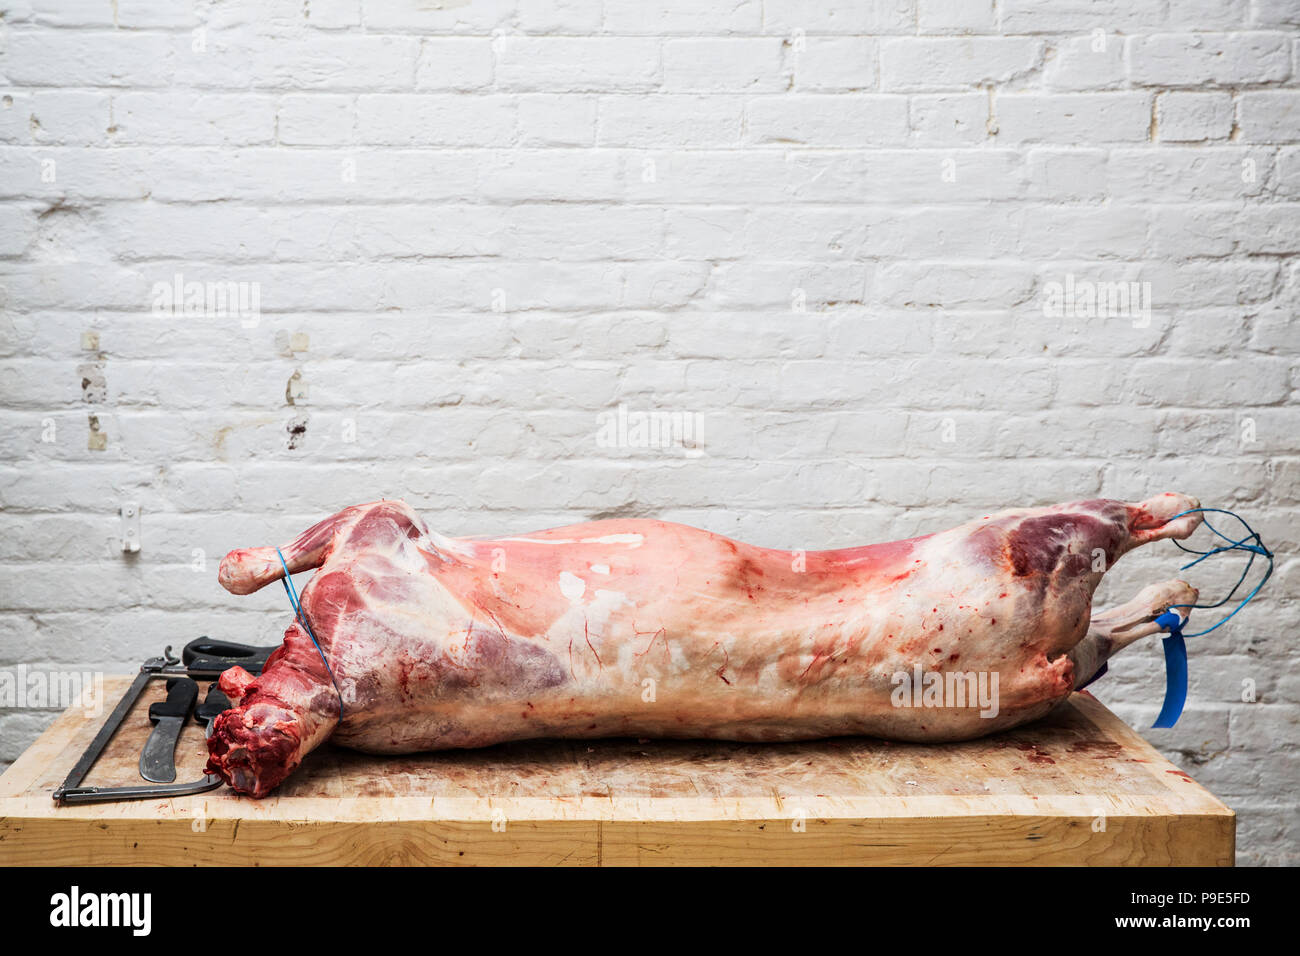 A whole lamb carcass on a butcher's block ready for butchering. Stock Photo